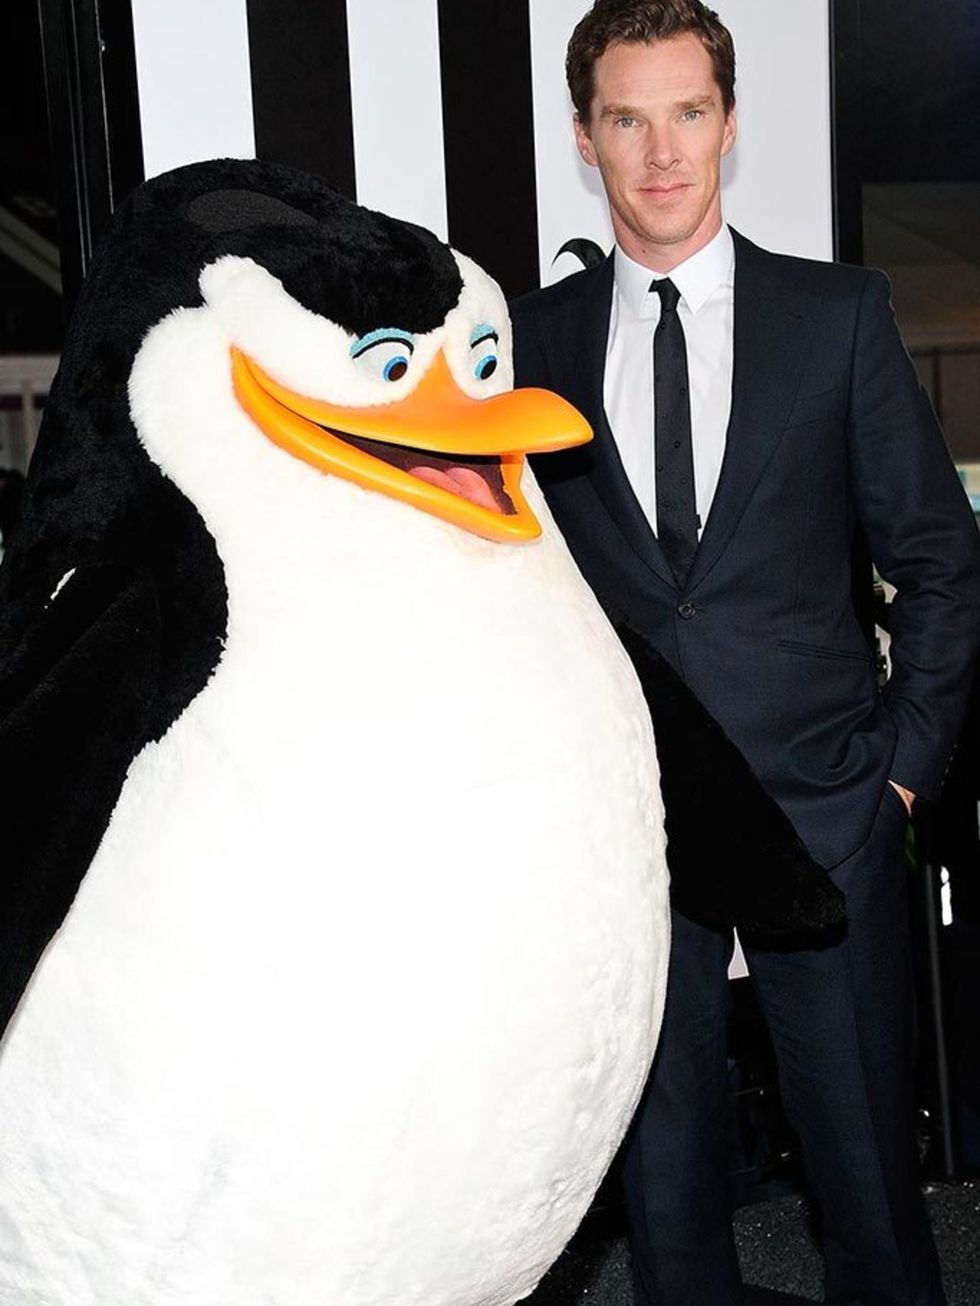 <p>With a penguin at a <em>Penguins of Madagascar</em> screening. Nothing could be better.</p>

<p><a href="http://www.elleuk.com/commercial/benedict-cumberbatch/"><em>Read our full cover interview with Benedict Cumberbatch now</em></a></p>